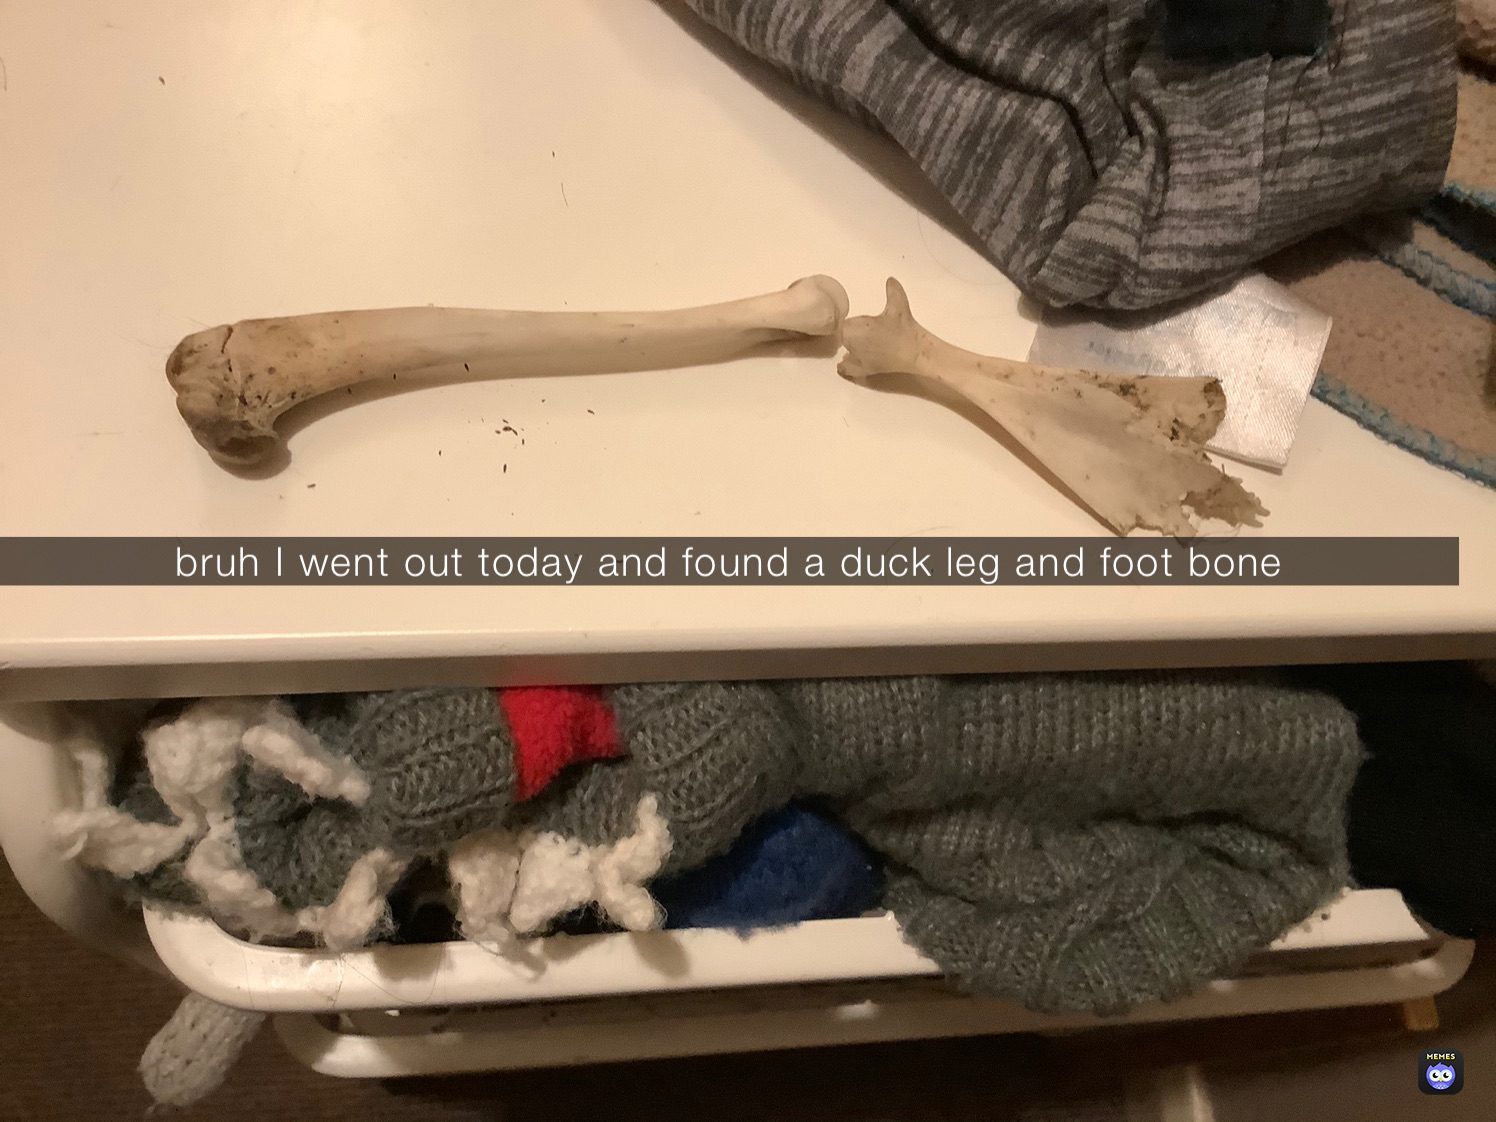 bruh I went out today and found a duck leg and foot bone